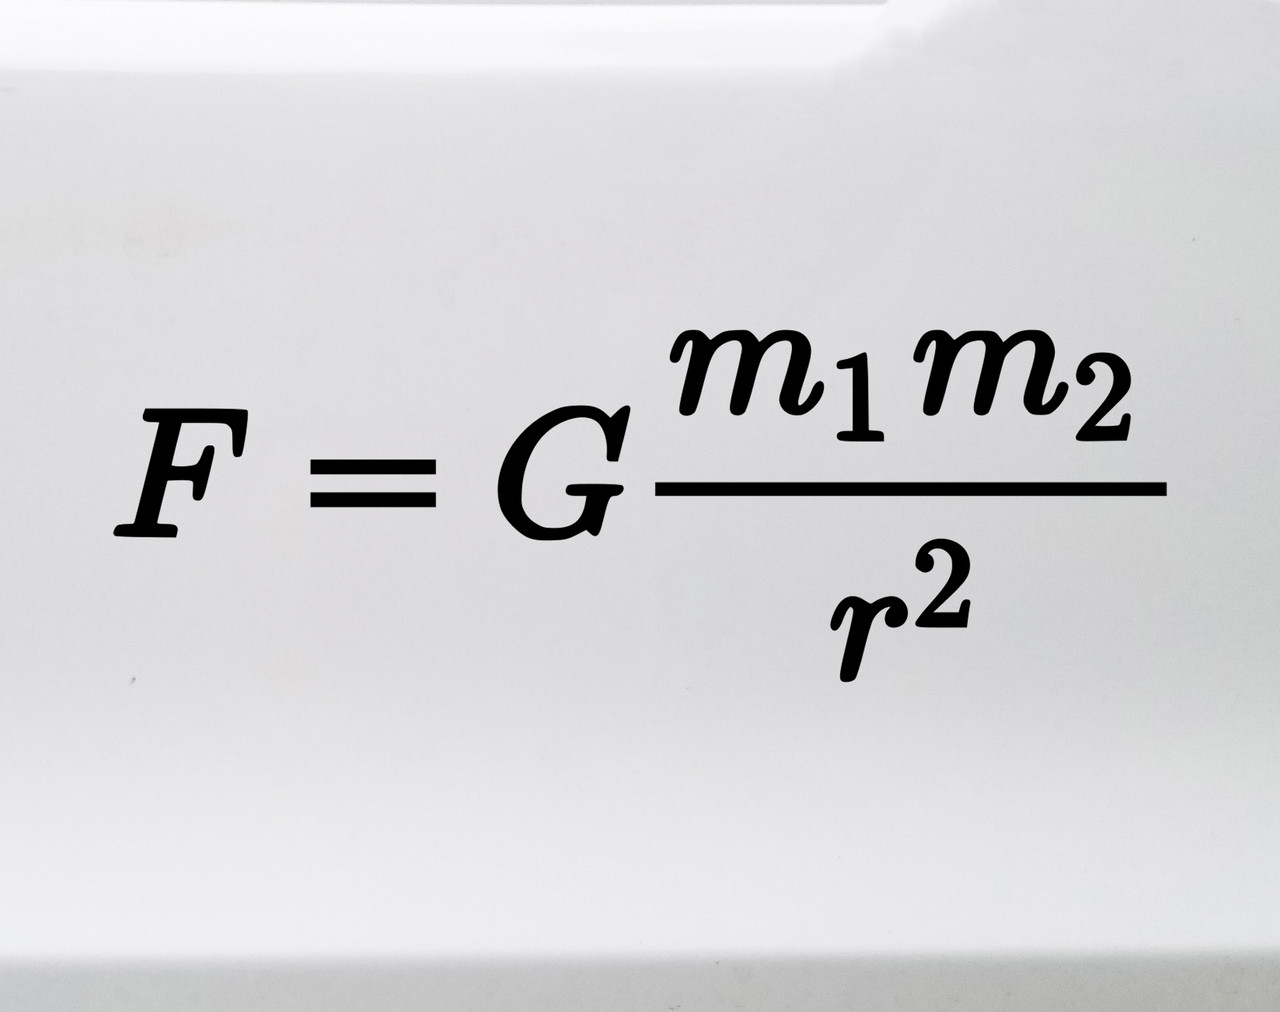 Law of Gravity Mathematical Formula Vinyl Decal - Isaac Newton Equation - Die Cut Decal
